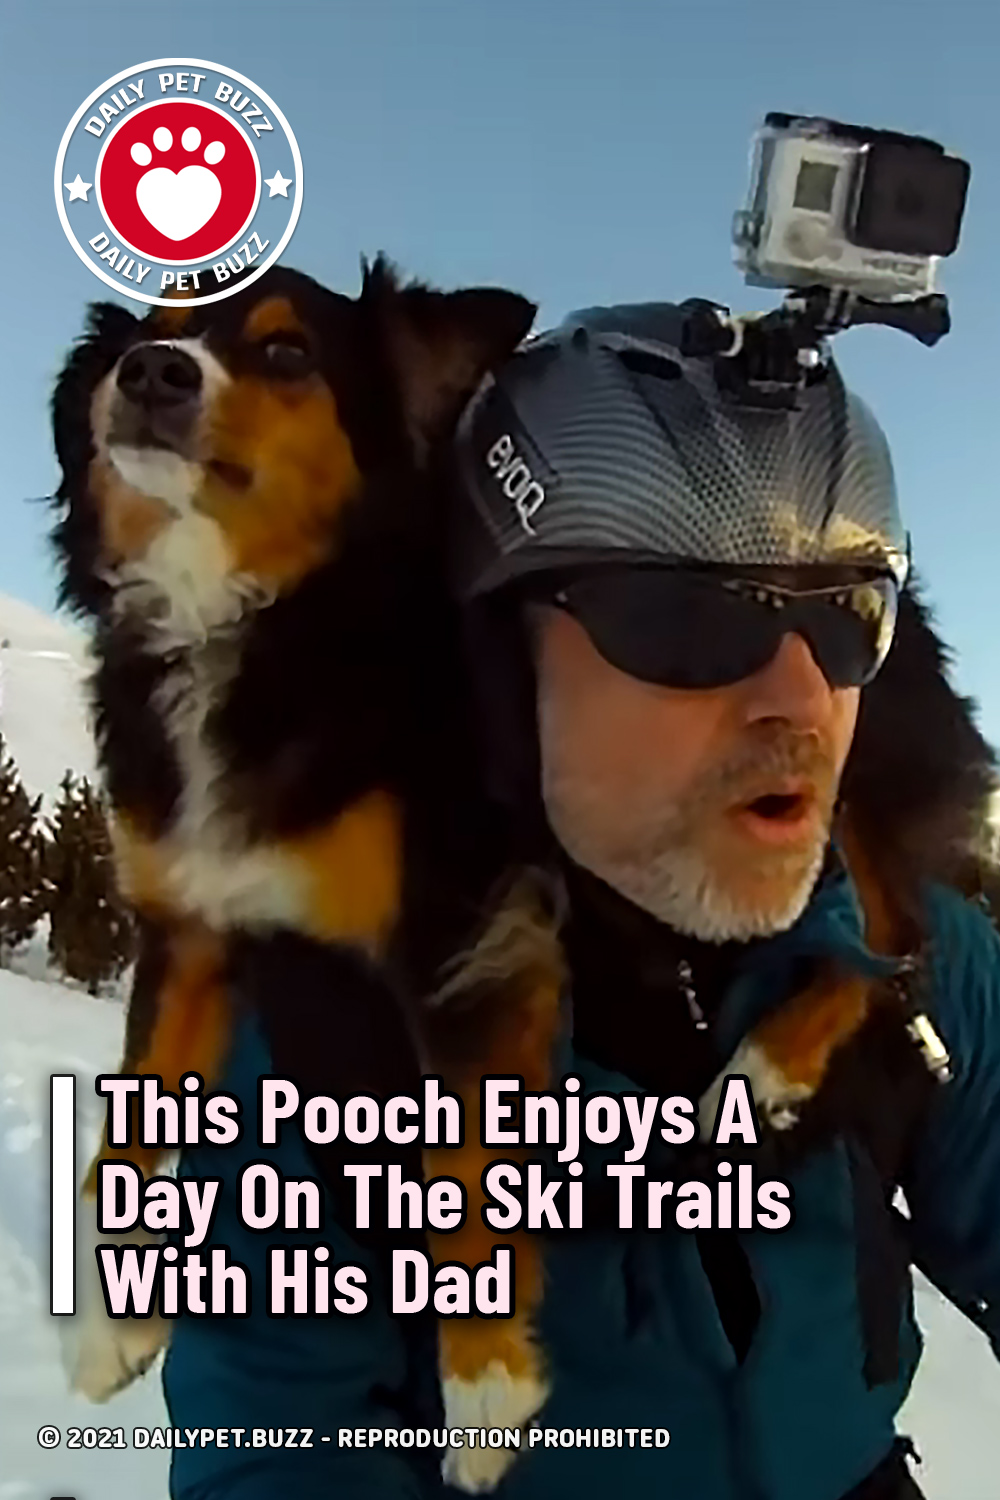 This Pooch Enjoys A Day On The Ski Trails With His Dad